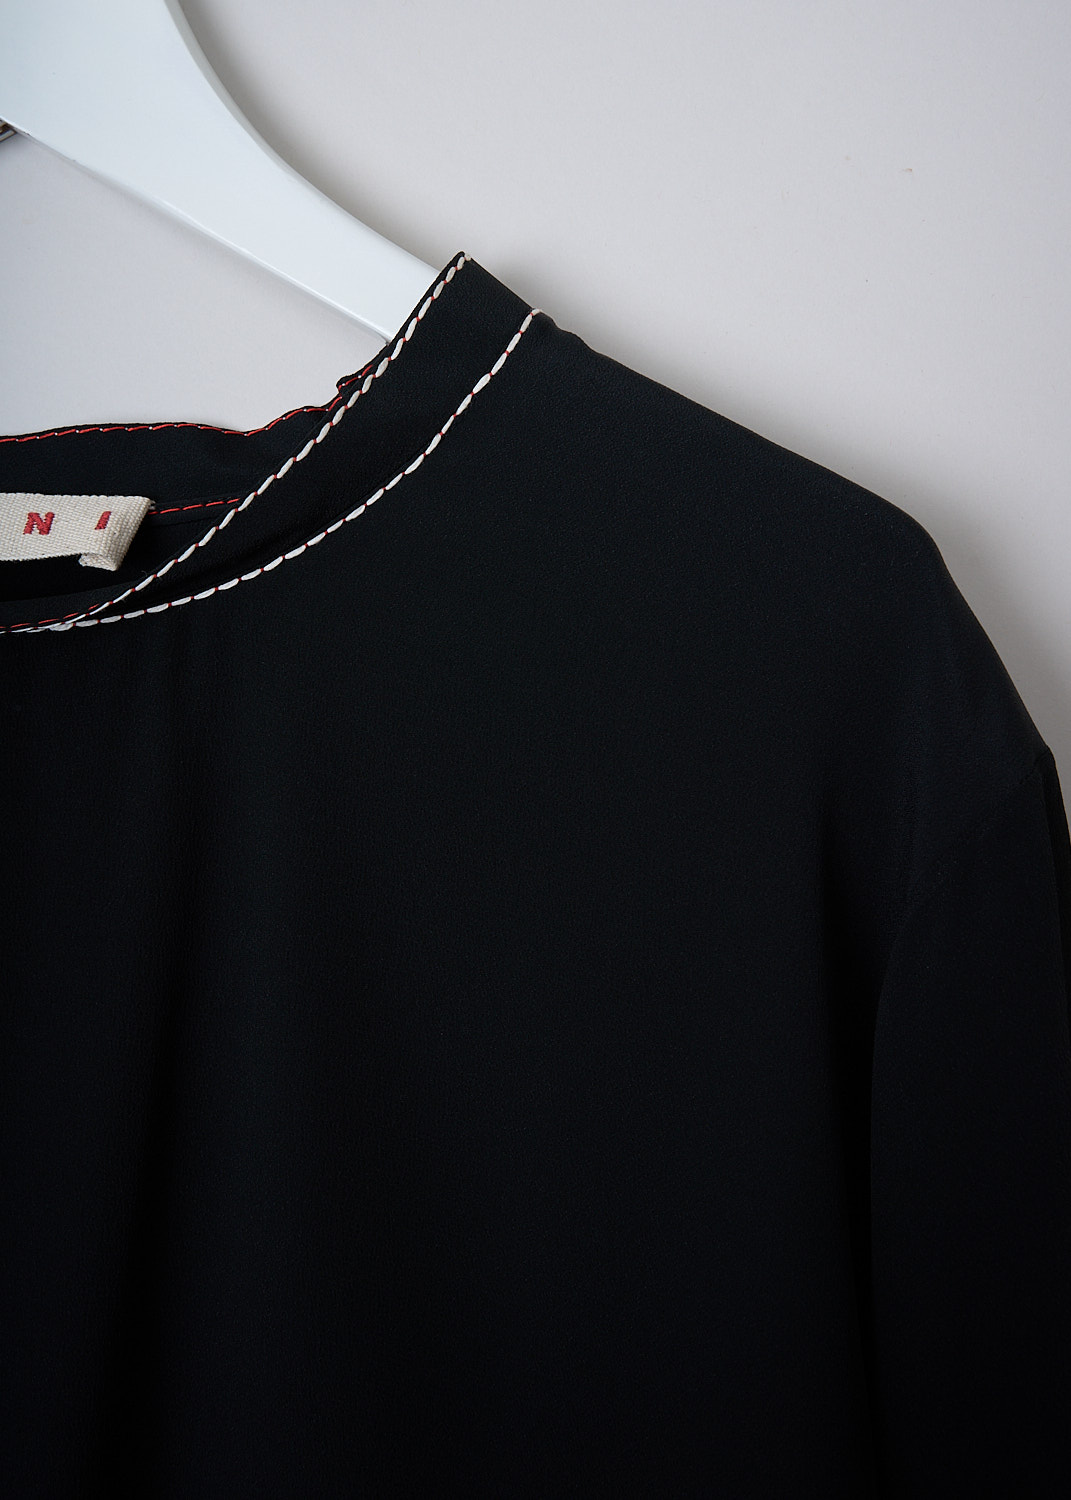 MARNI, BLACK WASHED CRÊPE TOP WITH CONTRAST STITCHING, CAMA0015M1_TA089_00N99, Black, Detail, This black washed crêpe top has round neckline with white and red stitching. The top has short sleeves and an asymmetric hemline with small slits. 
